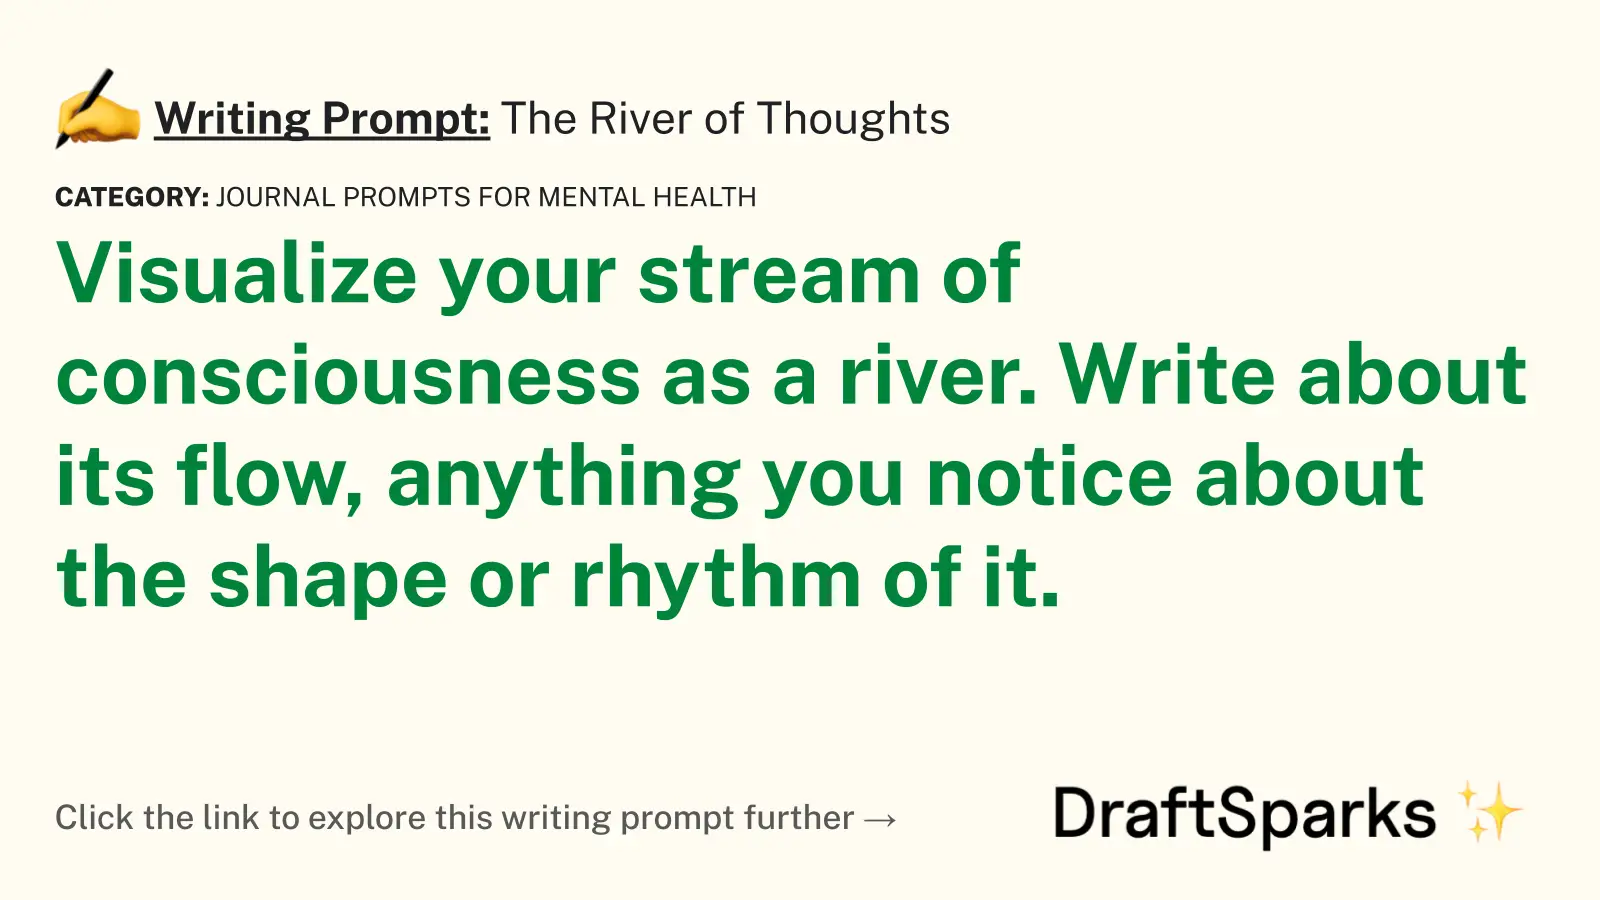 The River of Thoughts